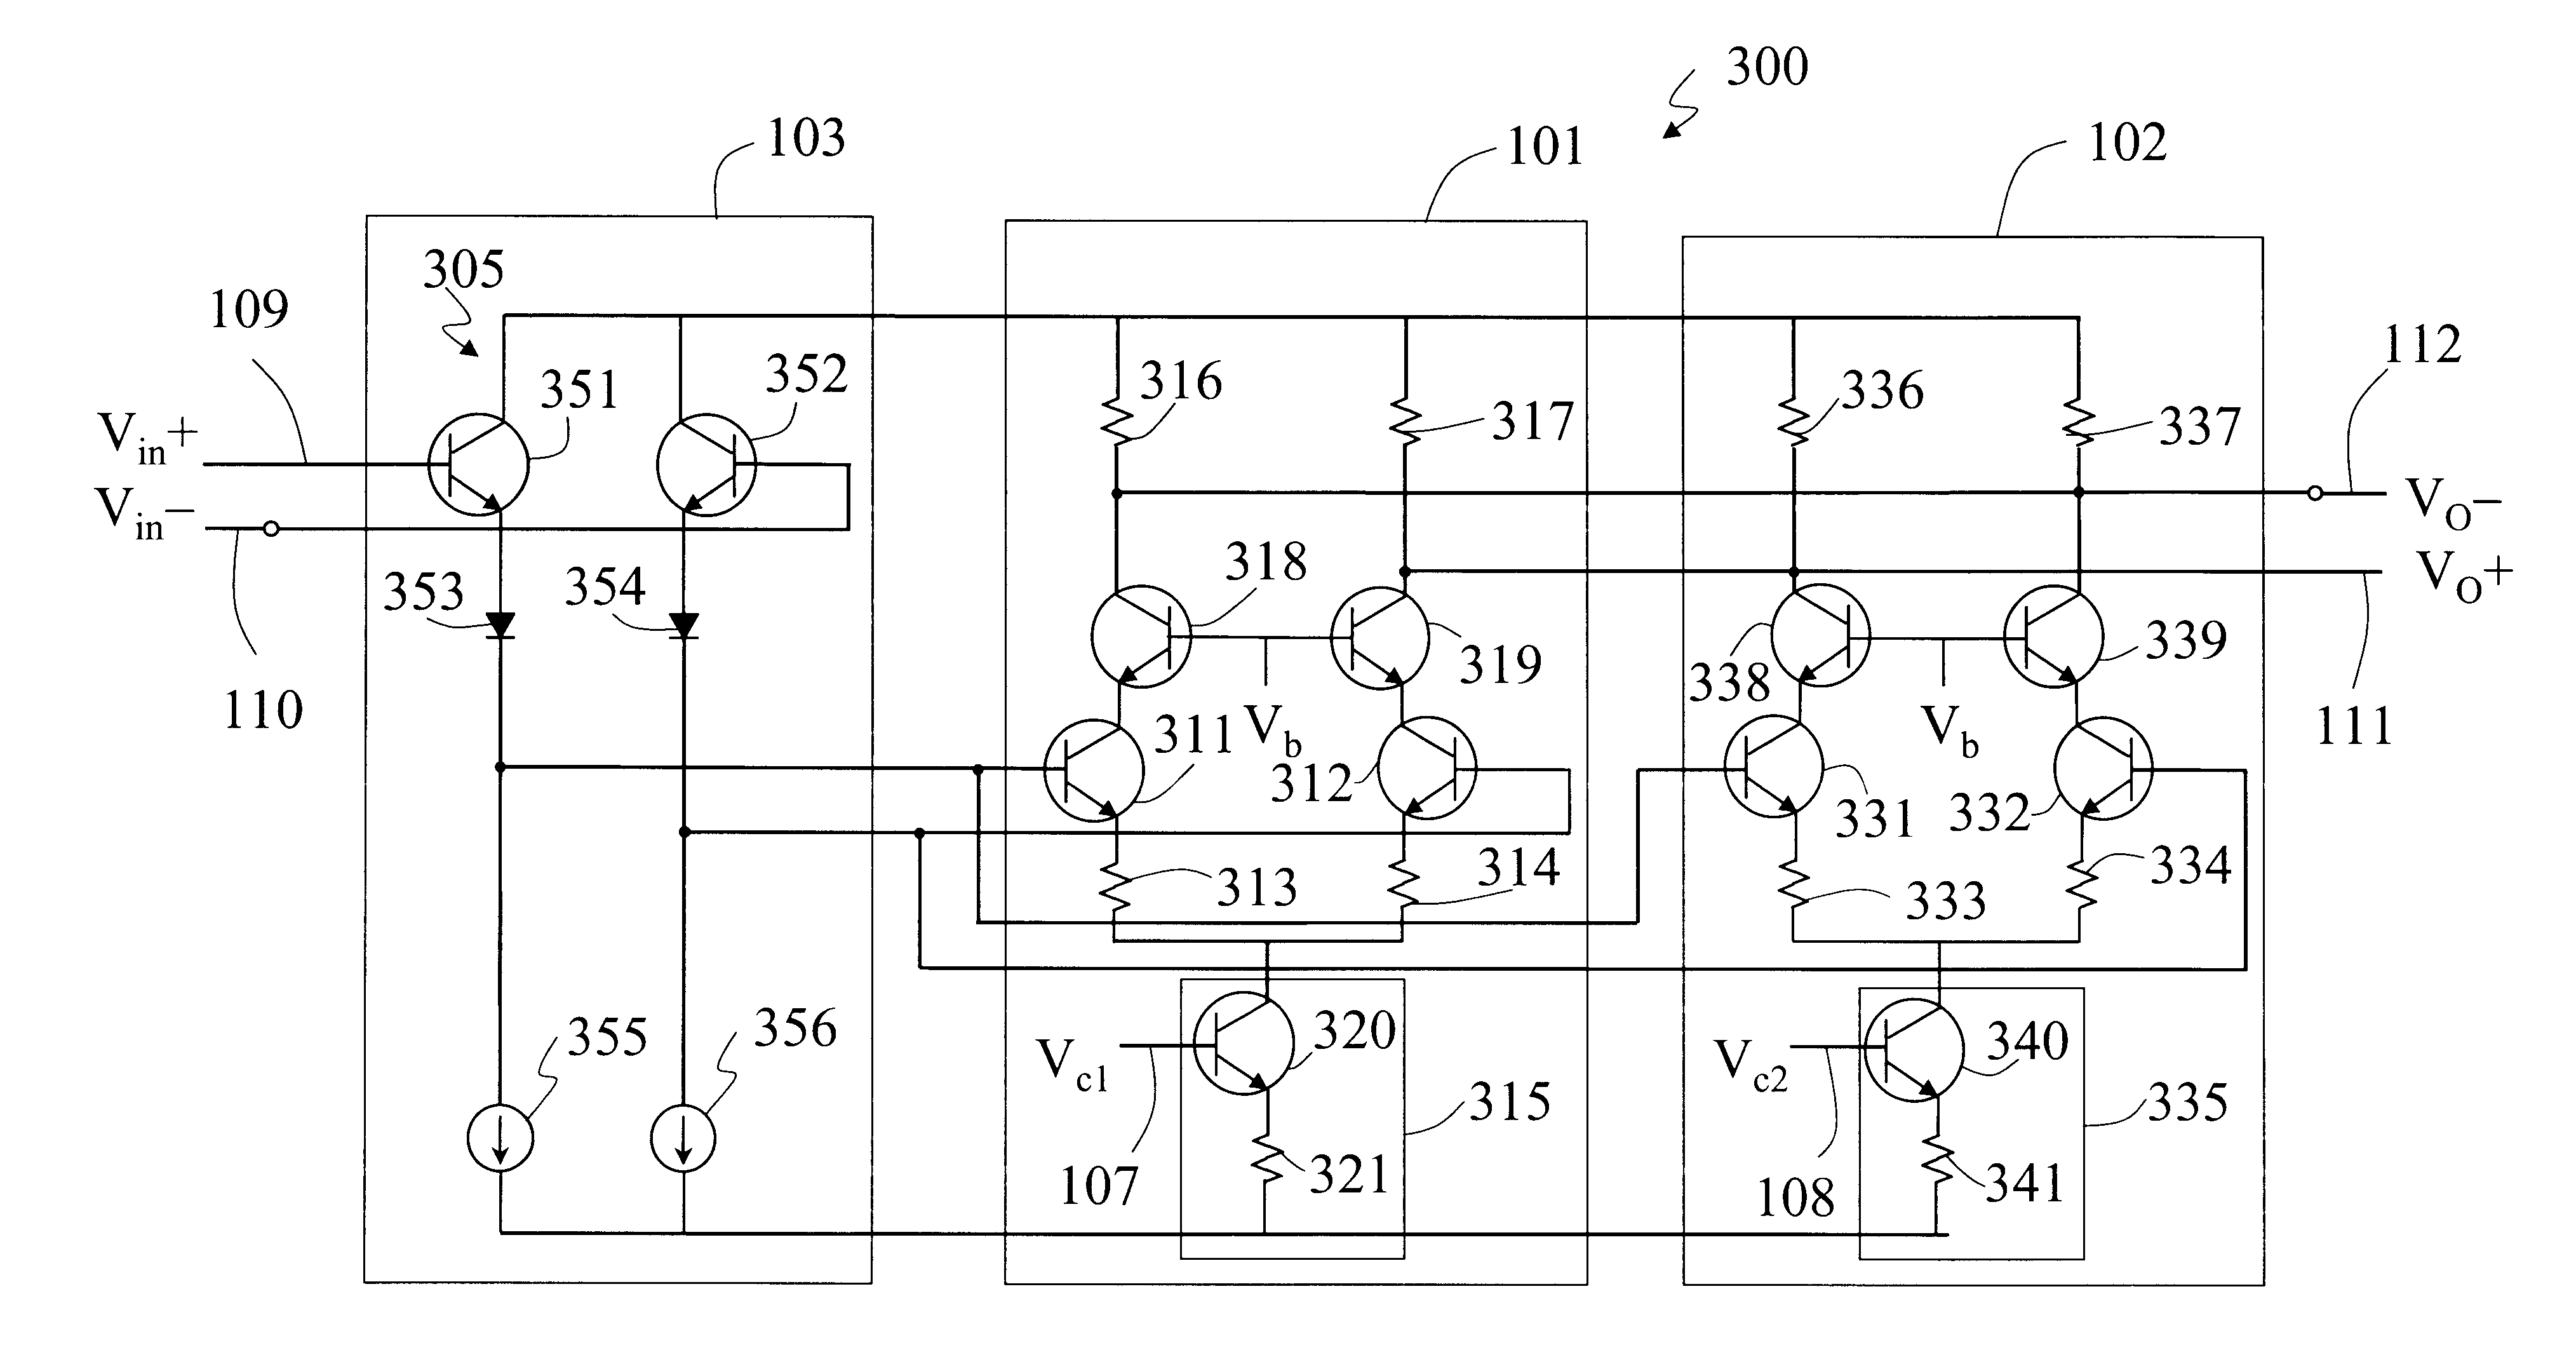 Wideband variable gain amplifier with low power supply voltage